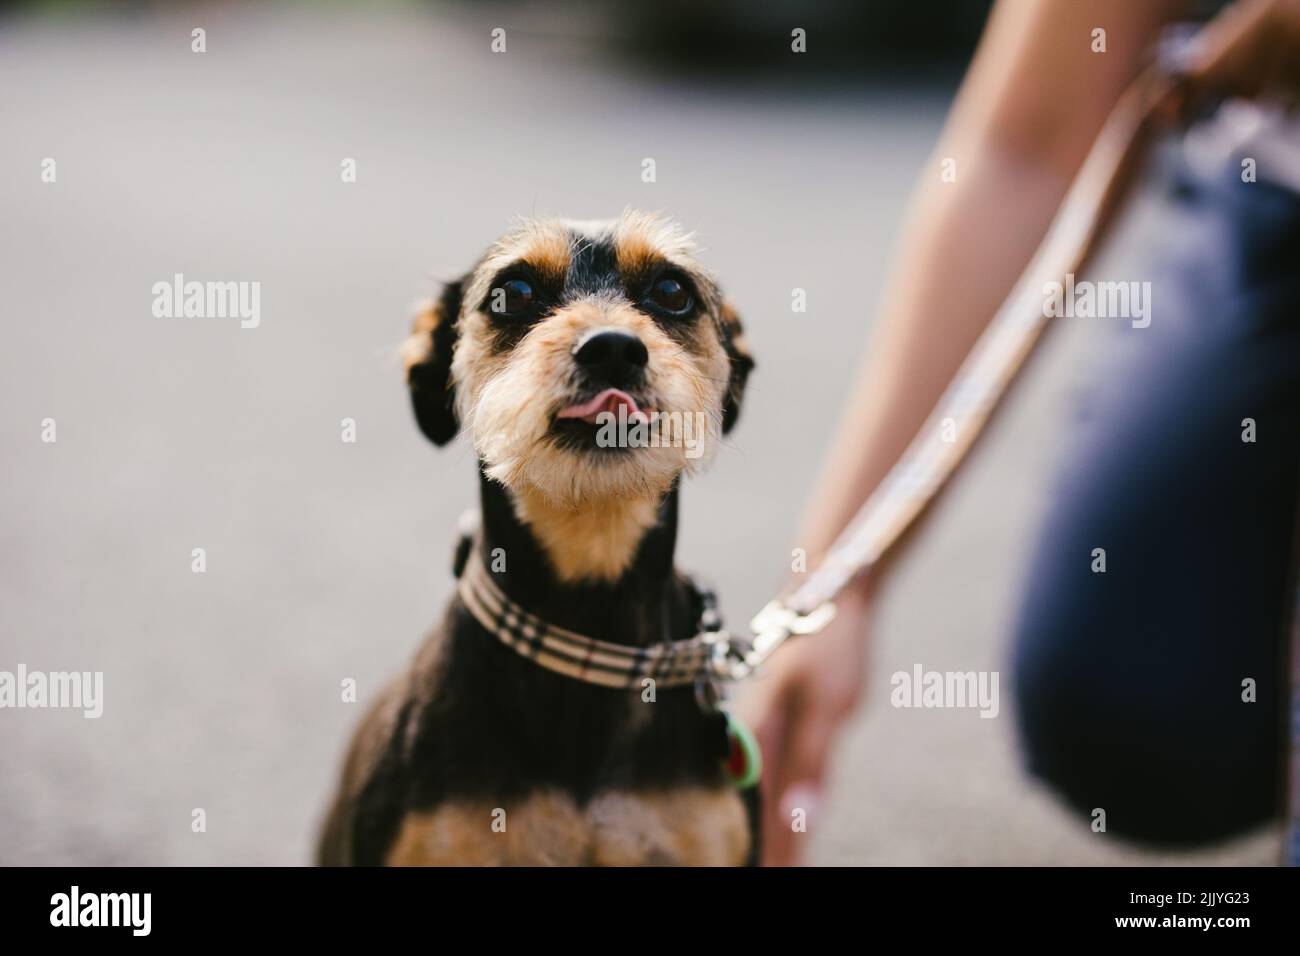 Small brown and black puppy licks nose and is adorable Stock Photo